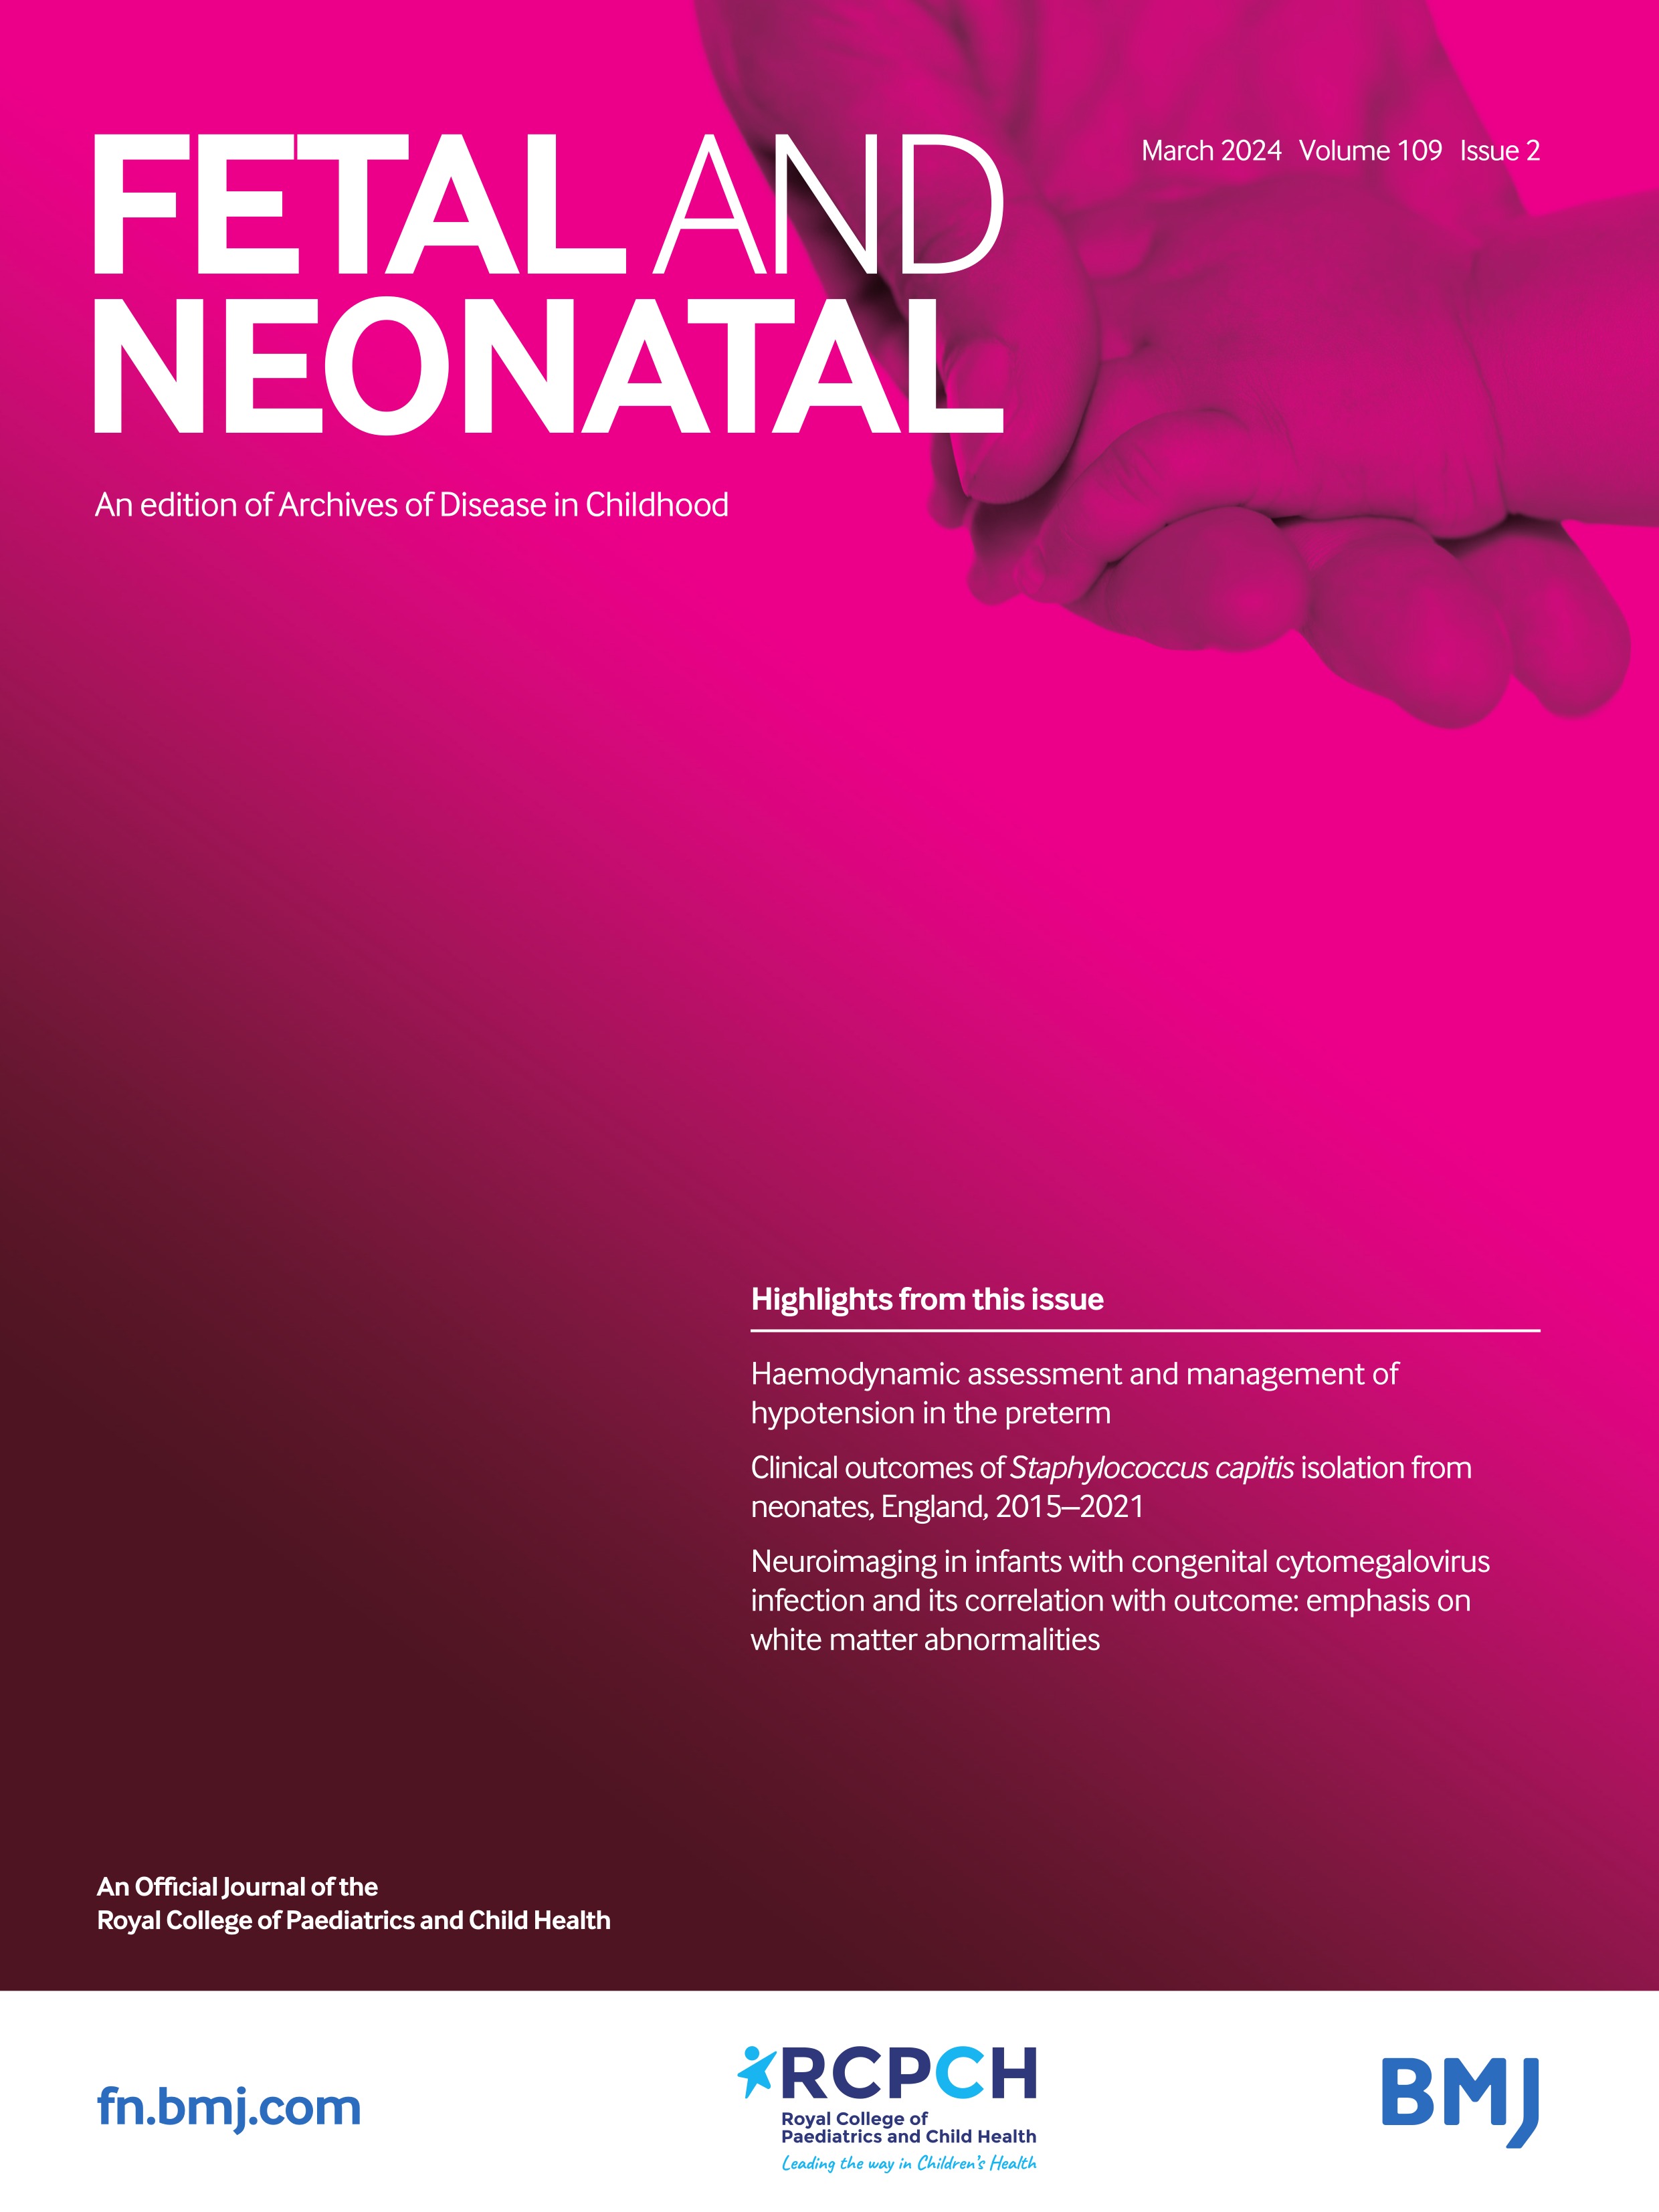 Neurodevelopmental outcomes of preterm neonates receiving rescue inhaled nitric oxide in the first week of age: a cohort study